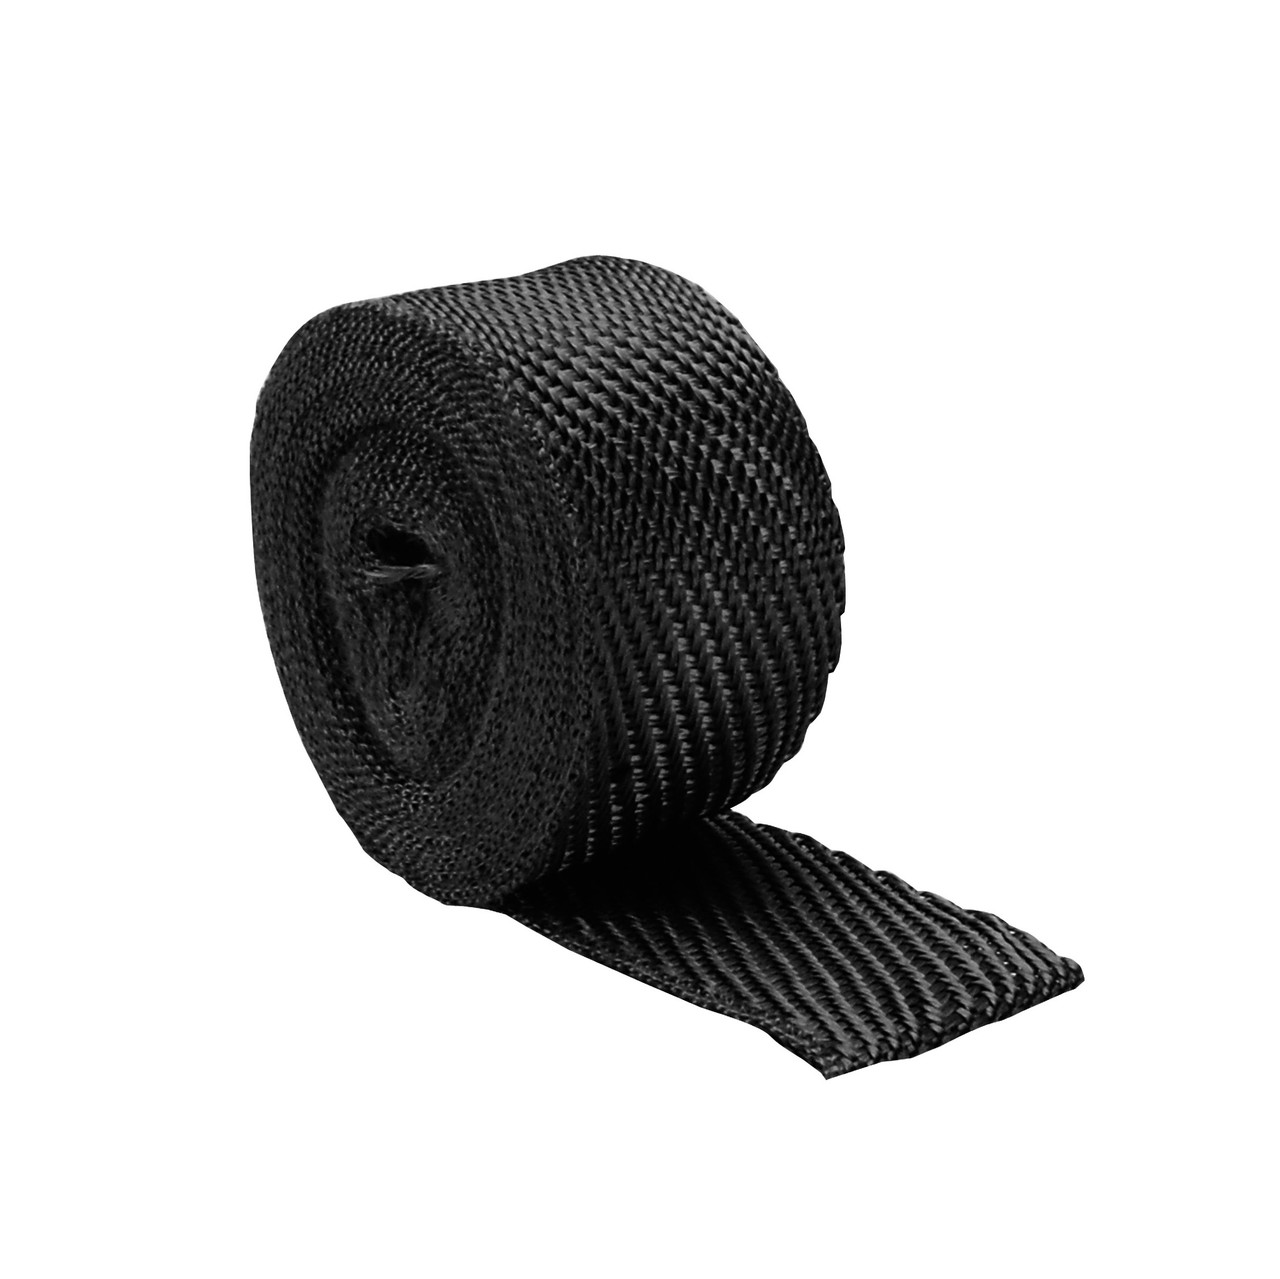 Tebru Heat Insulation Wrap, Pipe Wrap,16FT Black High Heat Insulation  Exhaust Pipe Wrap Tape Cloth for Car Motorcycle 